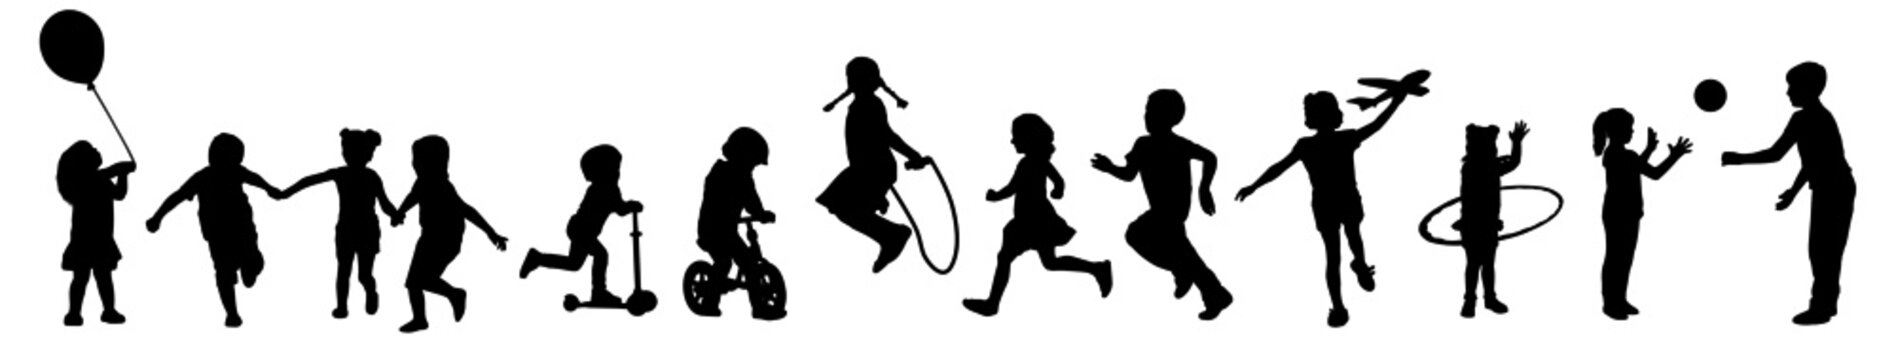 vector silhouette of played children